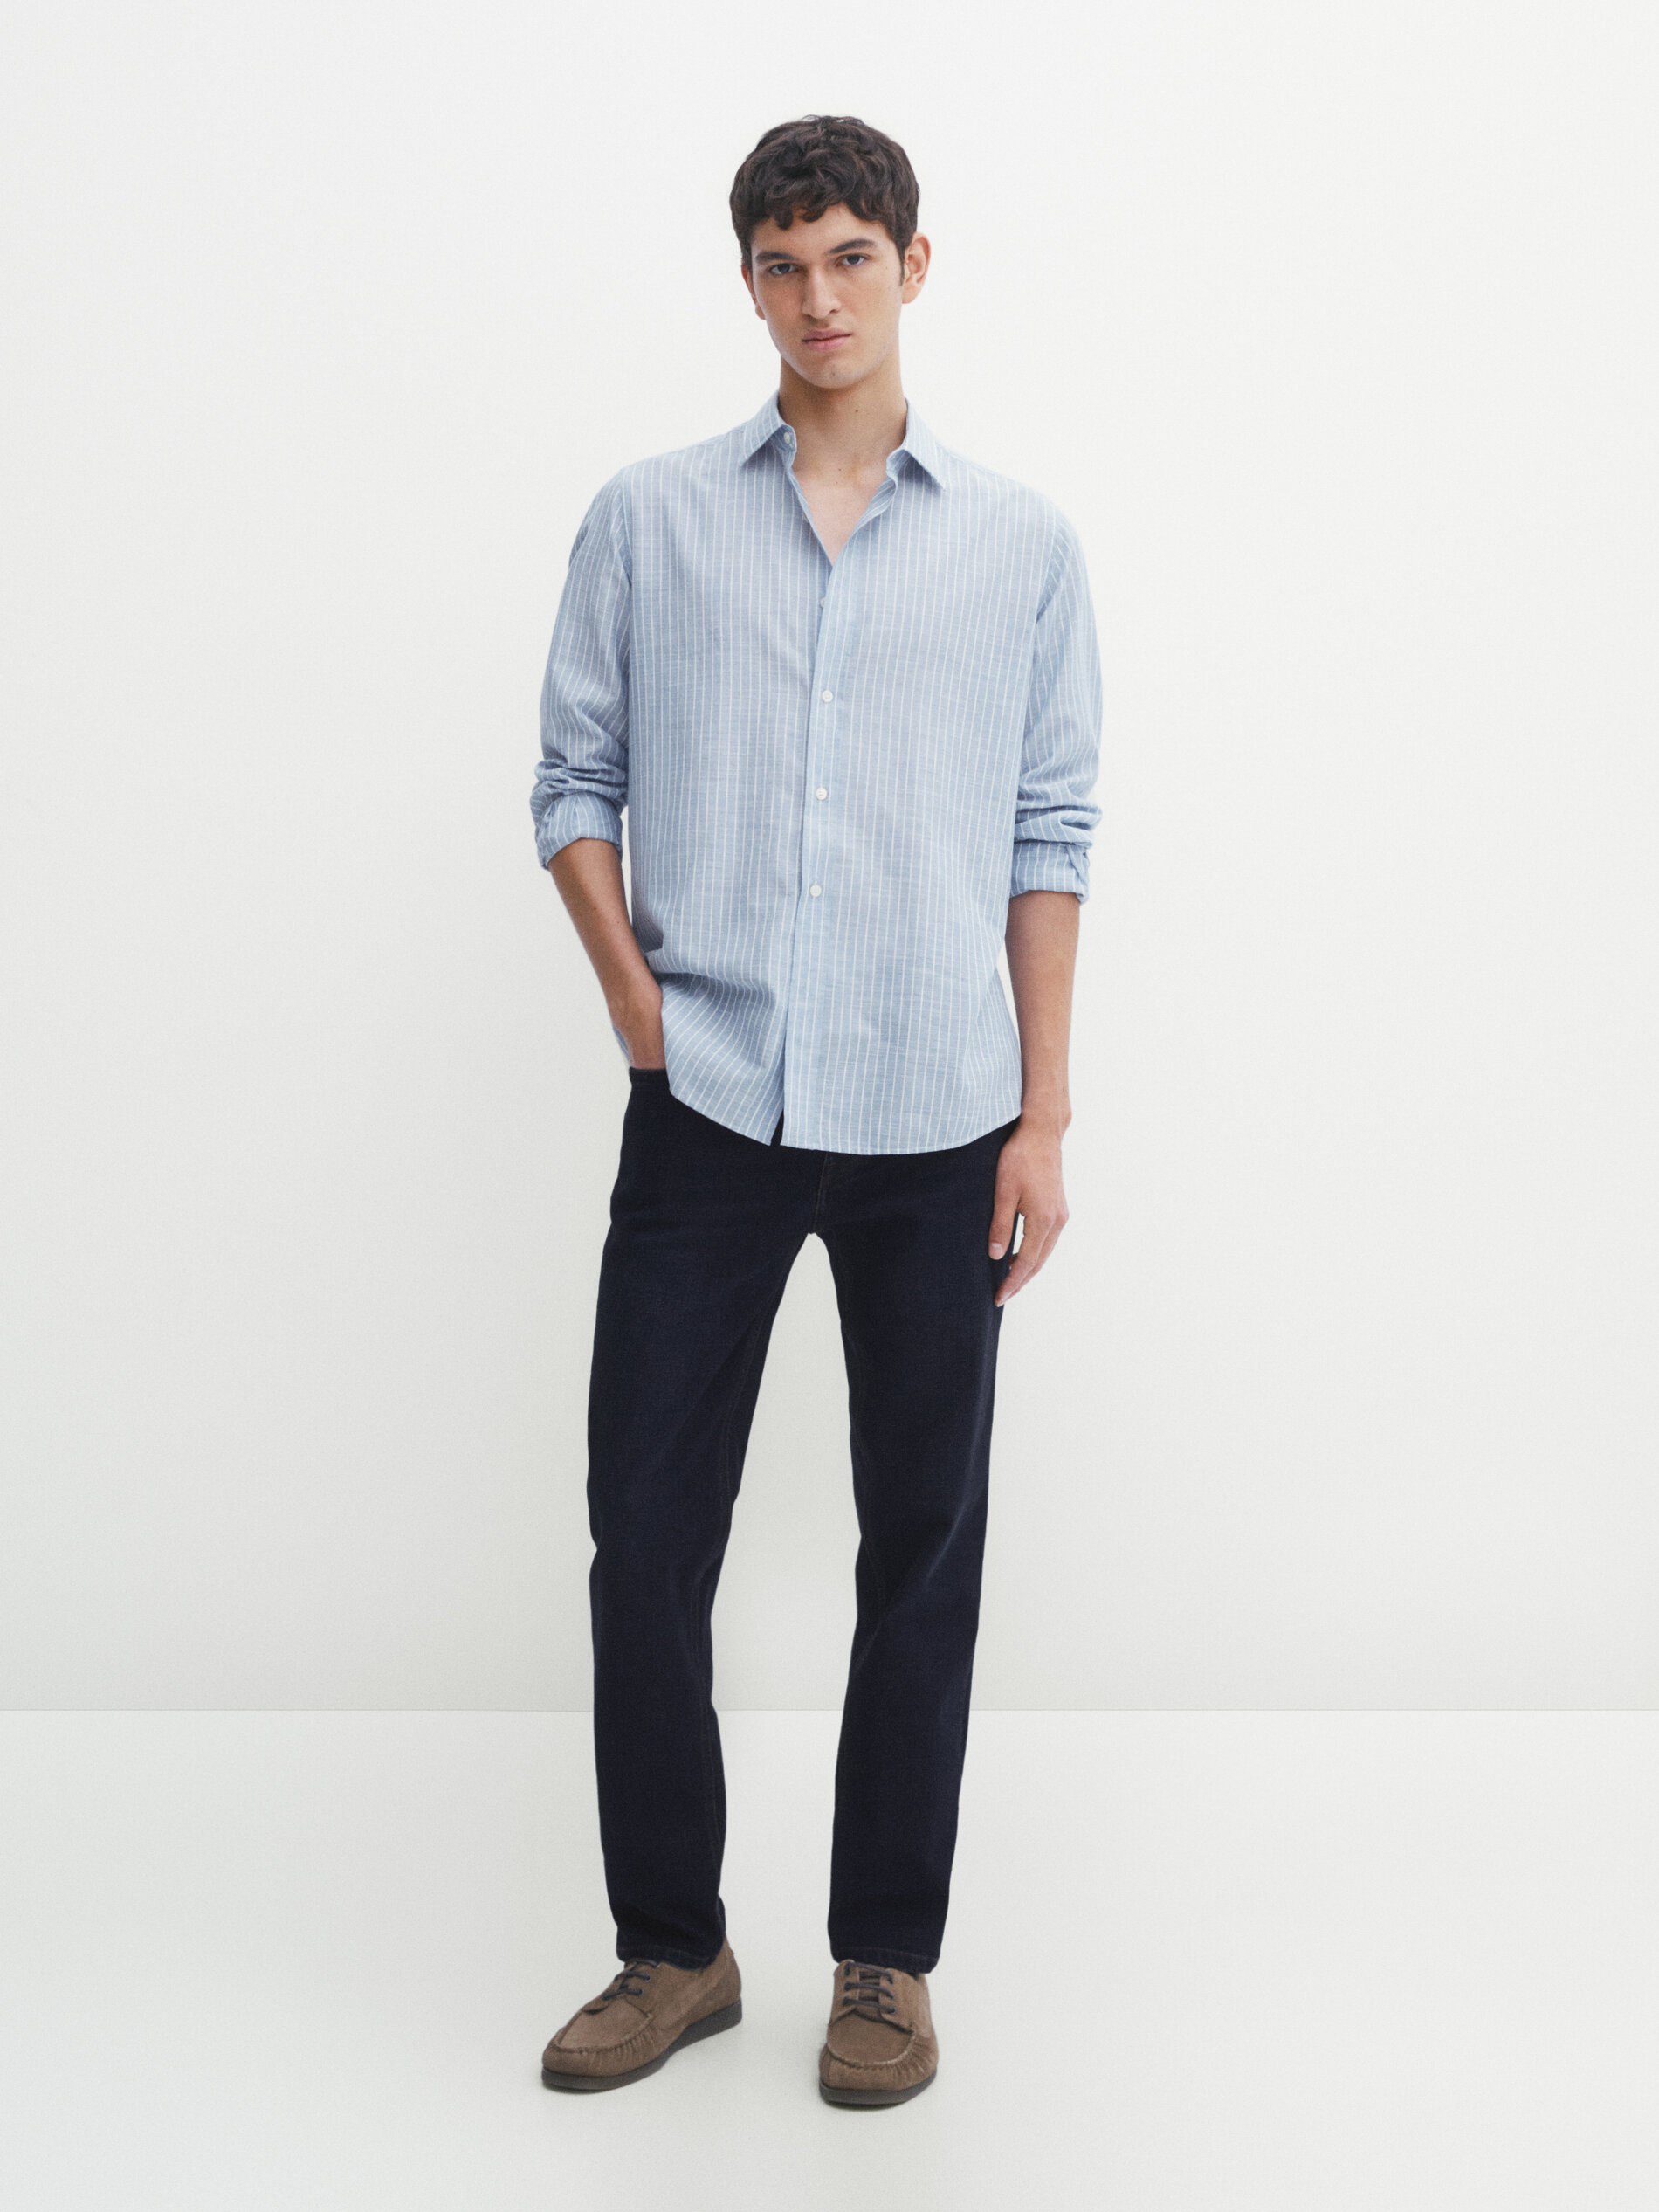 Jeans brushed rinse wash relaxed fit